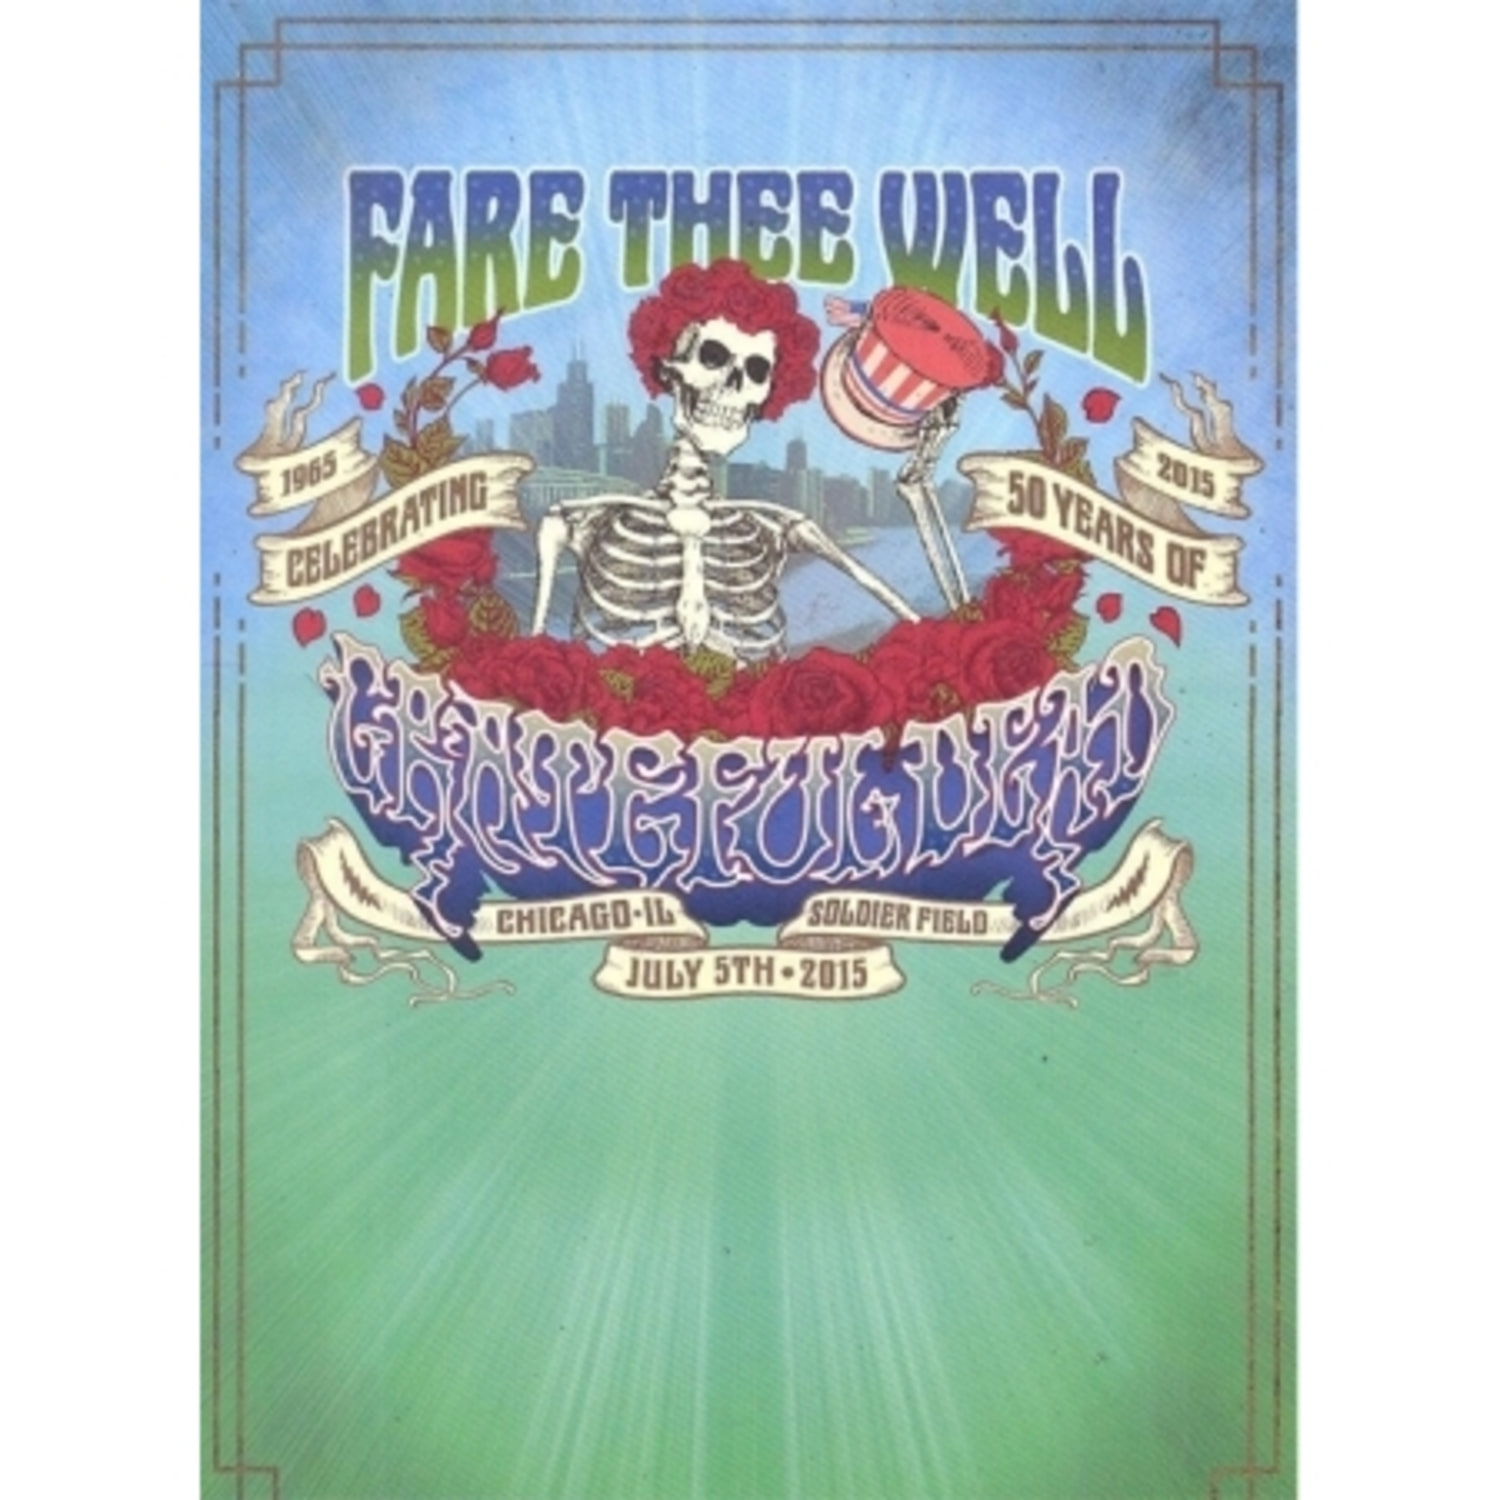 GRATEFUL DEAD - FARE THEE WELL (JULY 5TH)